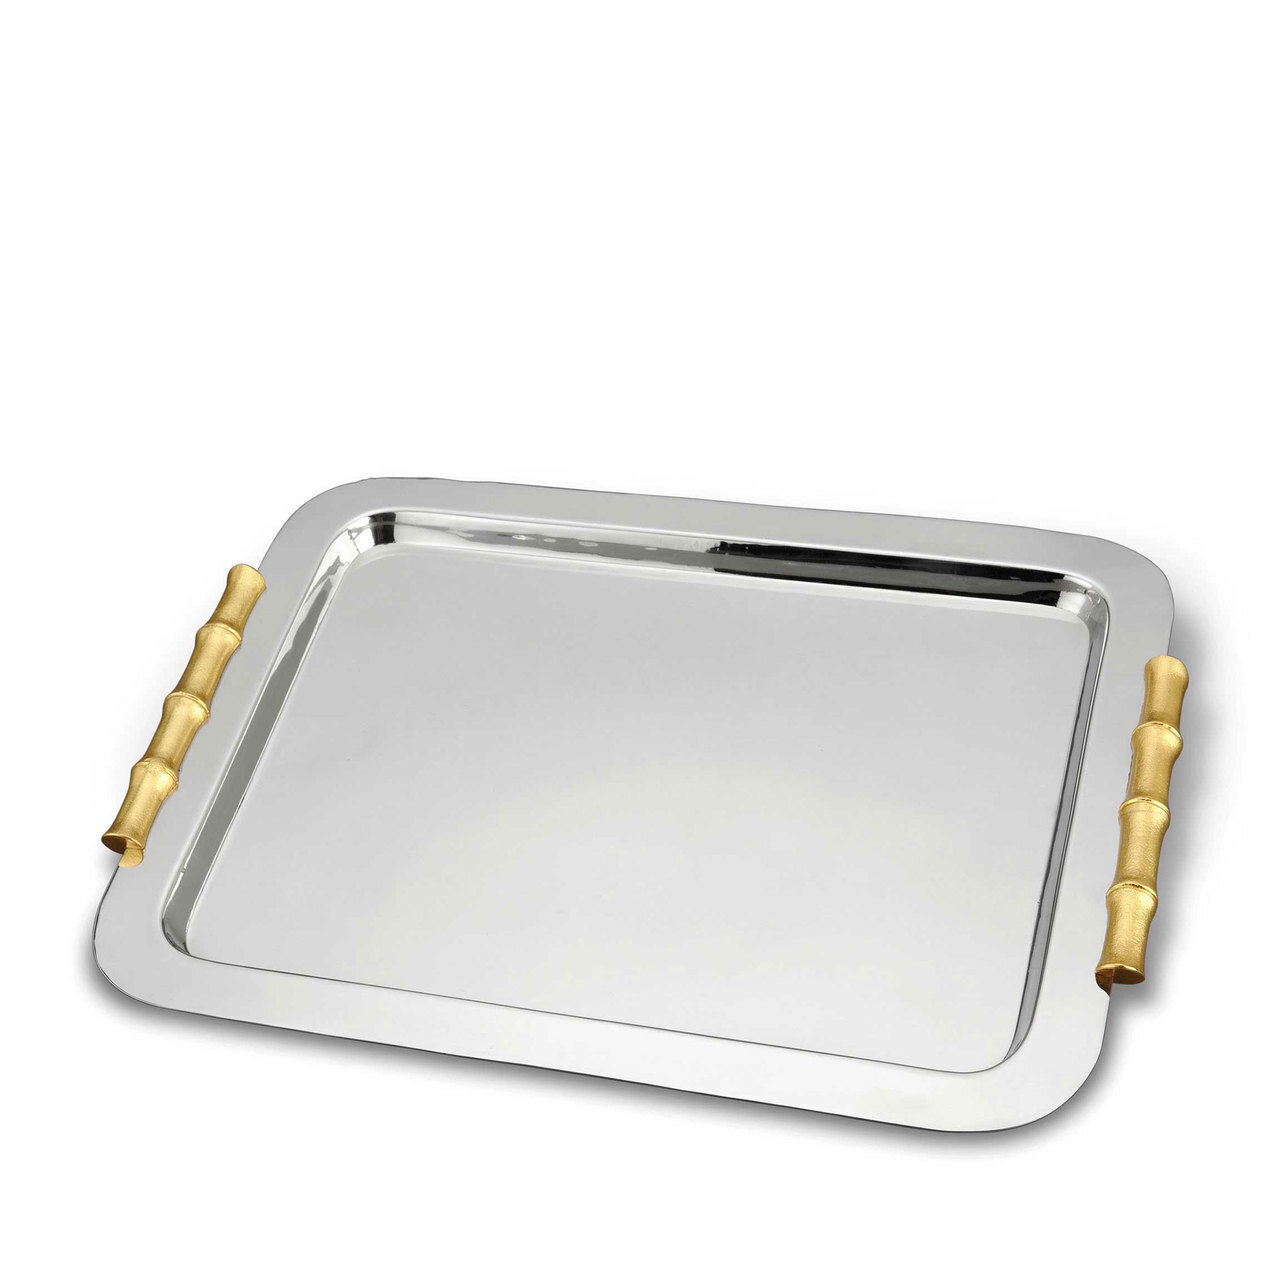 L'Objet Bambou Butler Tray 24k Gold-Plated Stainless Steel